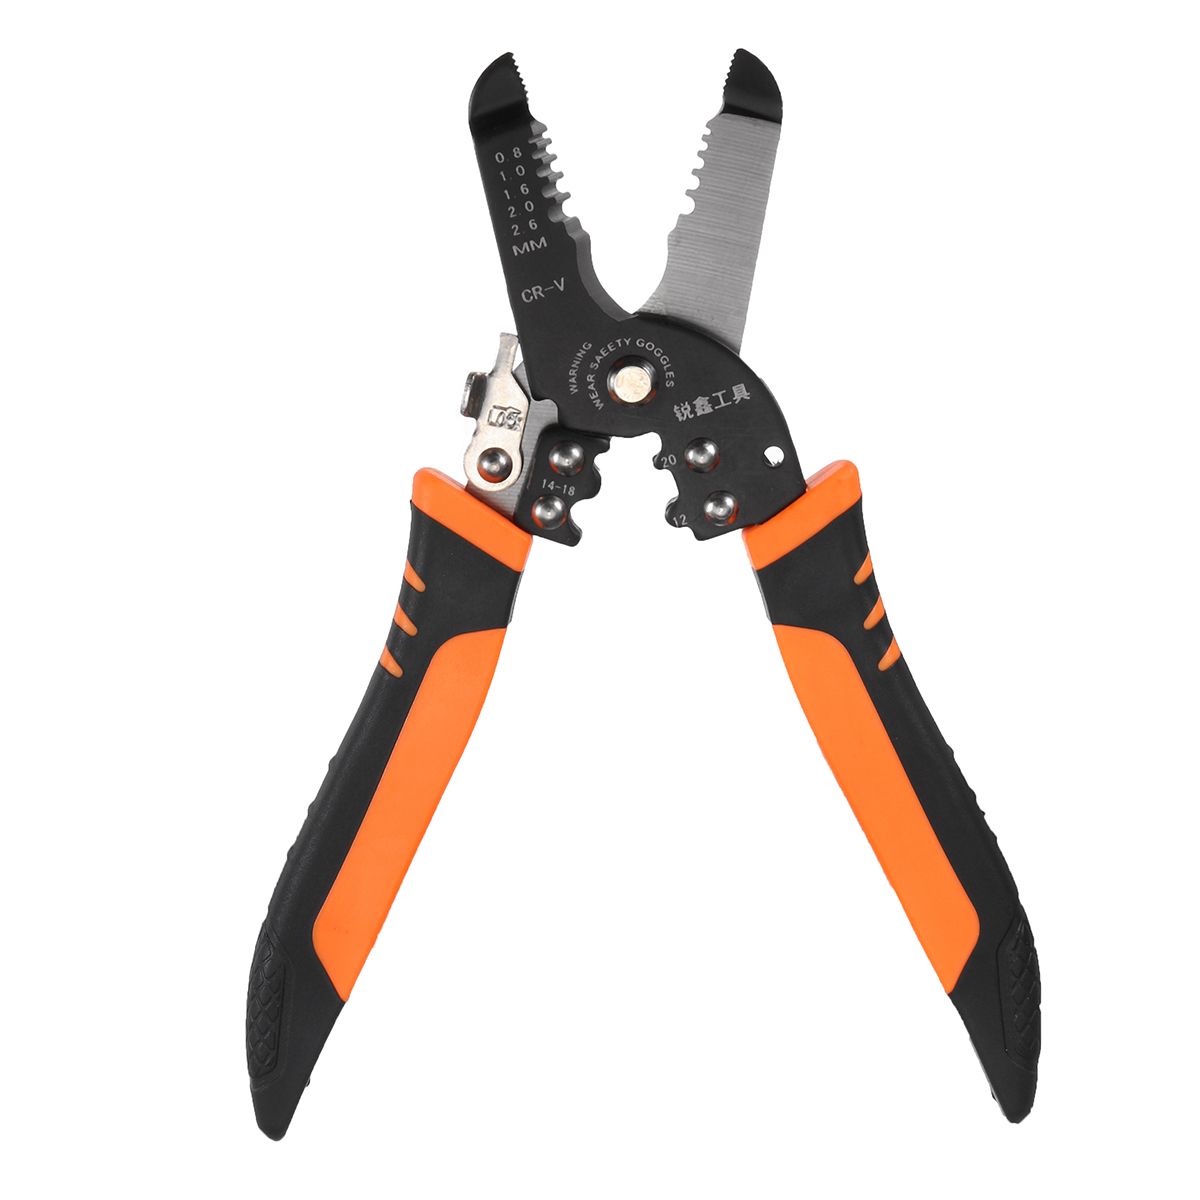 Cable-Wire-Stripper-Cutter-Crimper-Auto-Multi-Functional-Pliers-Tool-1638332